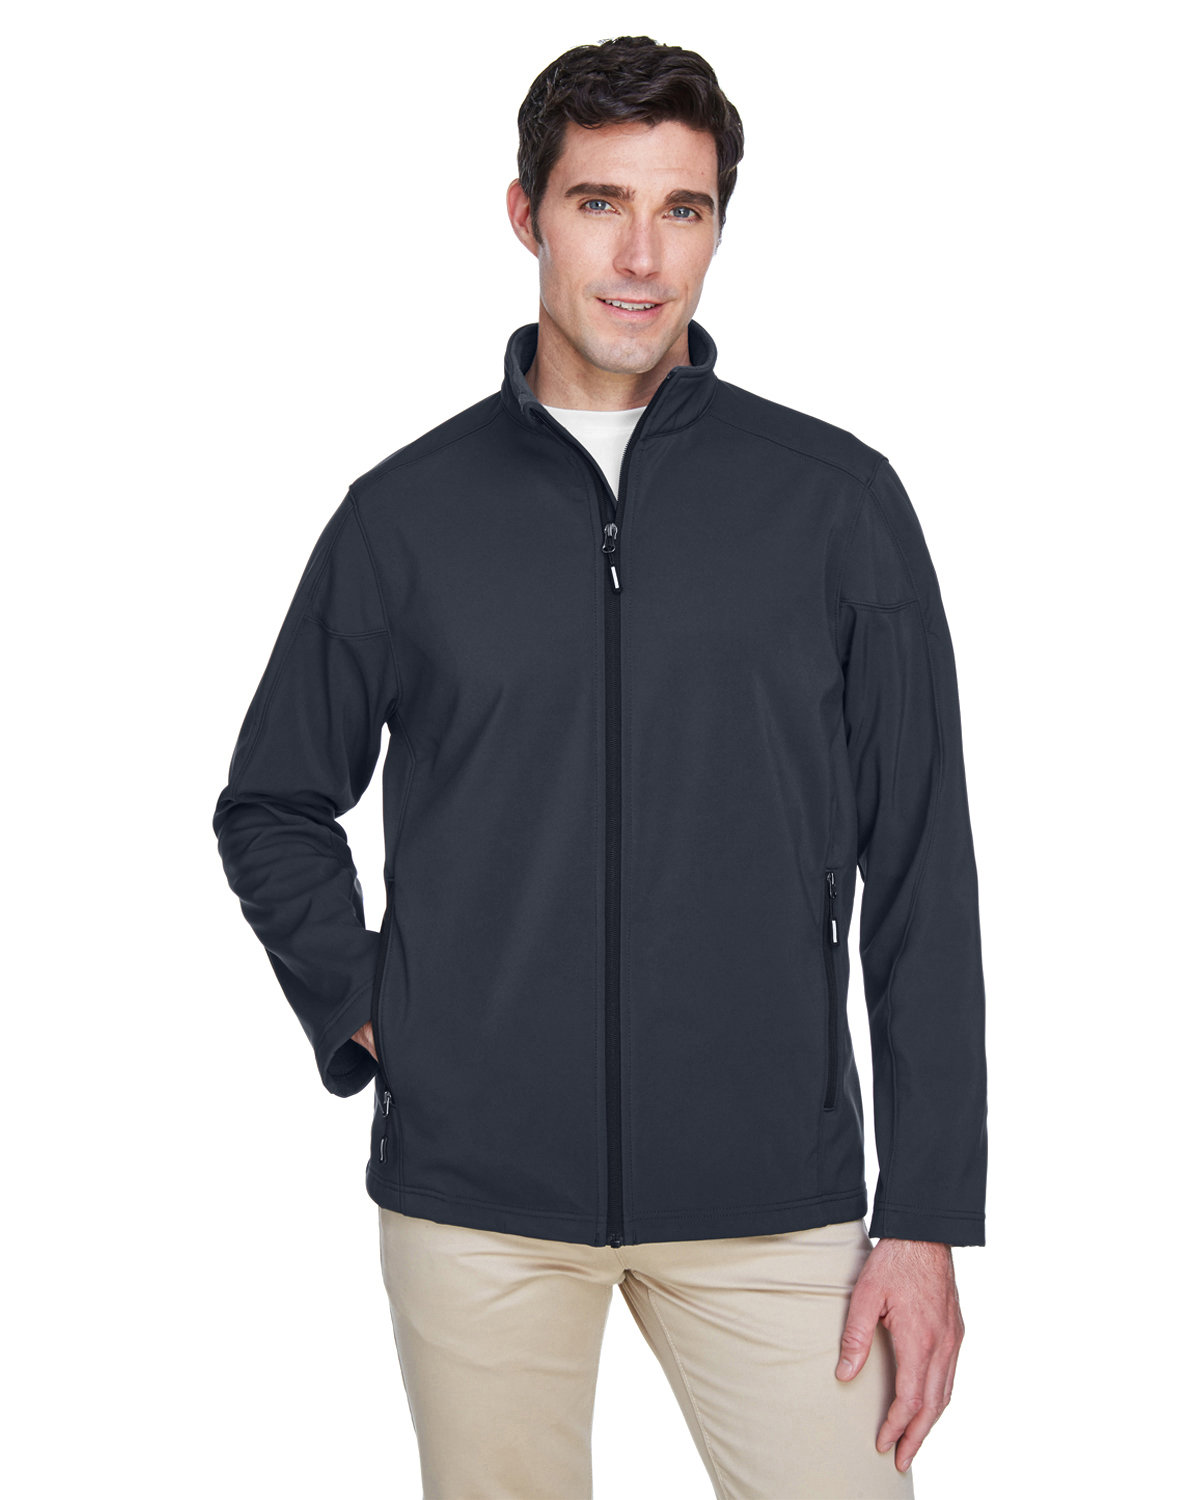 CORE365 Men's Cruise Two-Layer Fleece Bonded Soft Shell Jacket carbon 